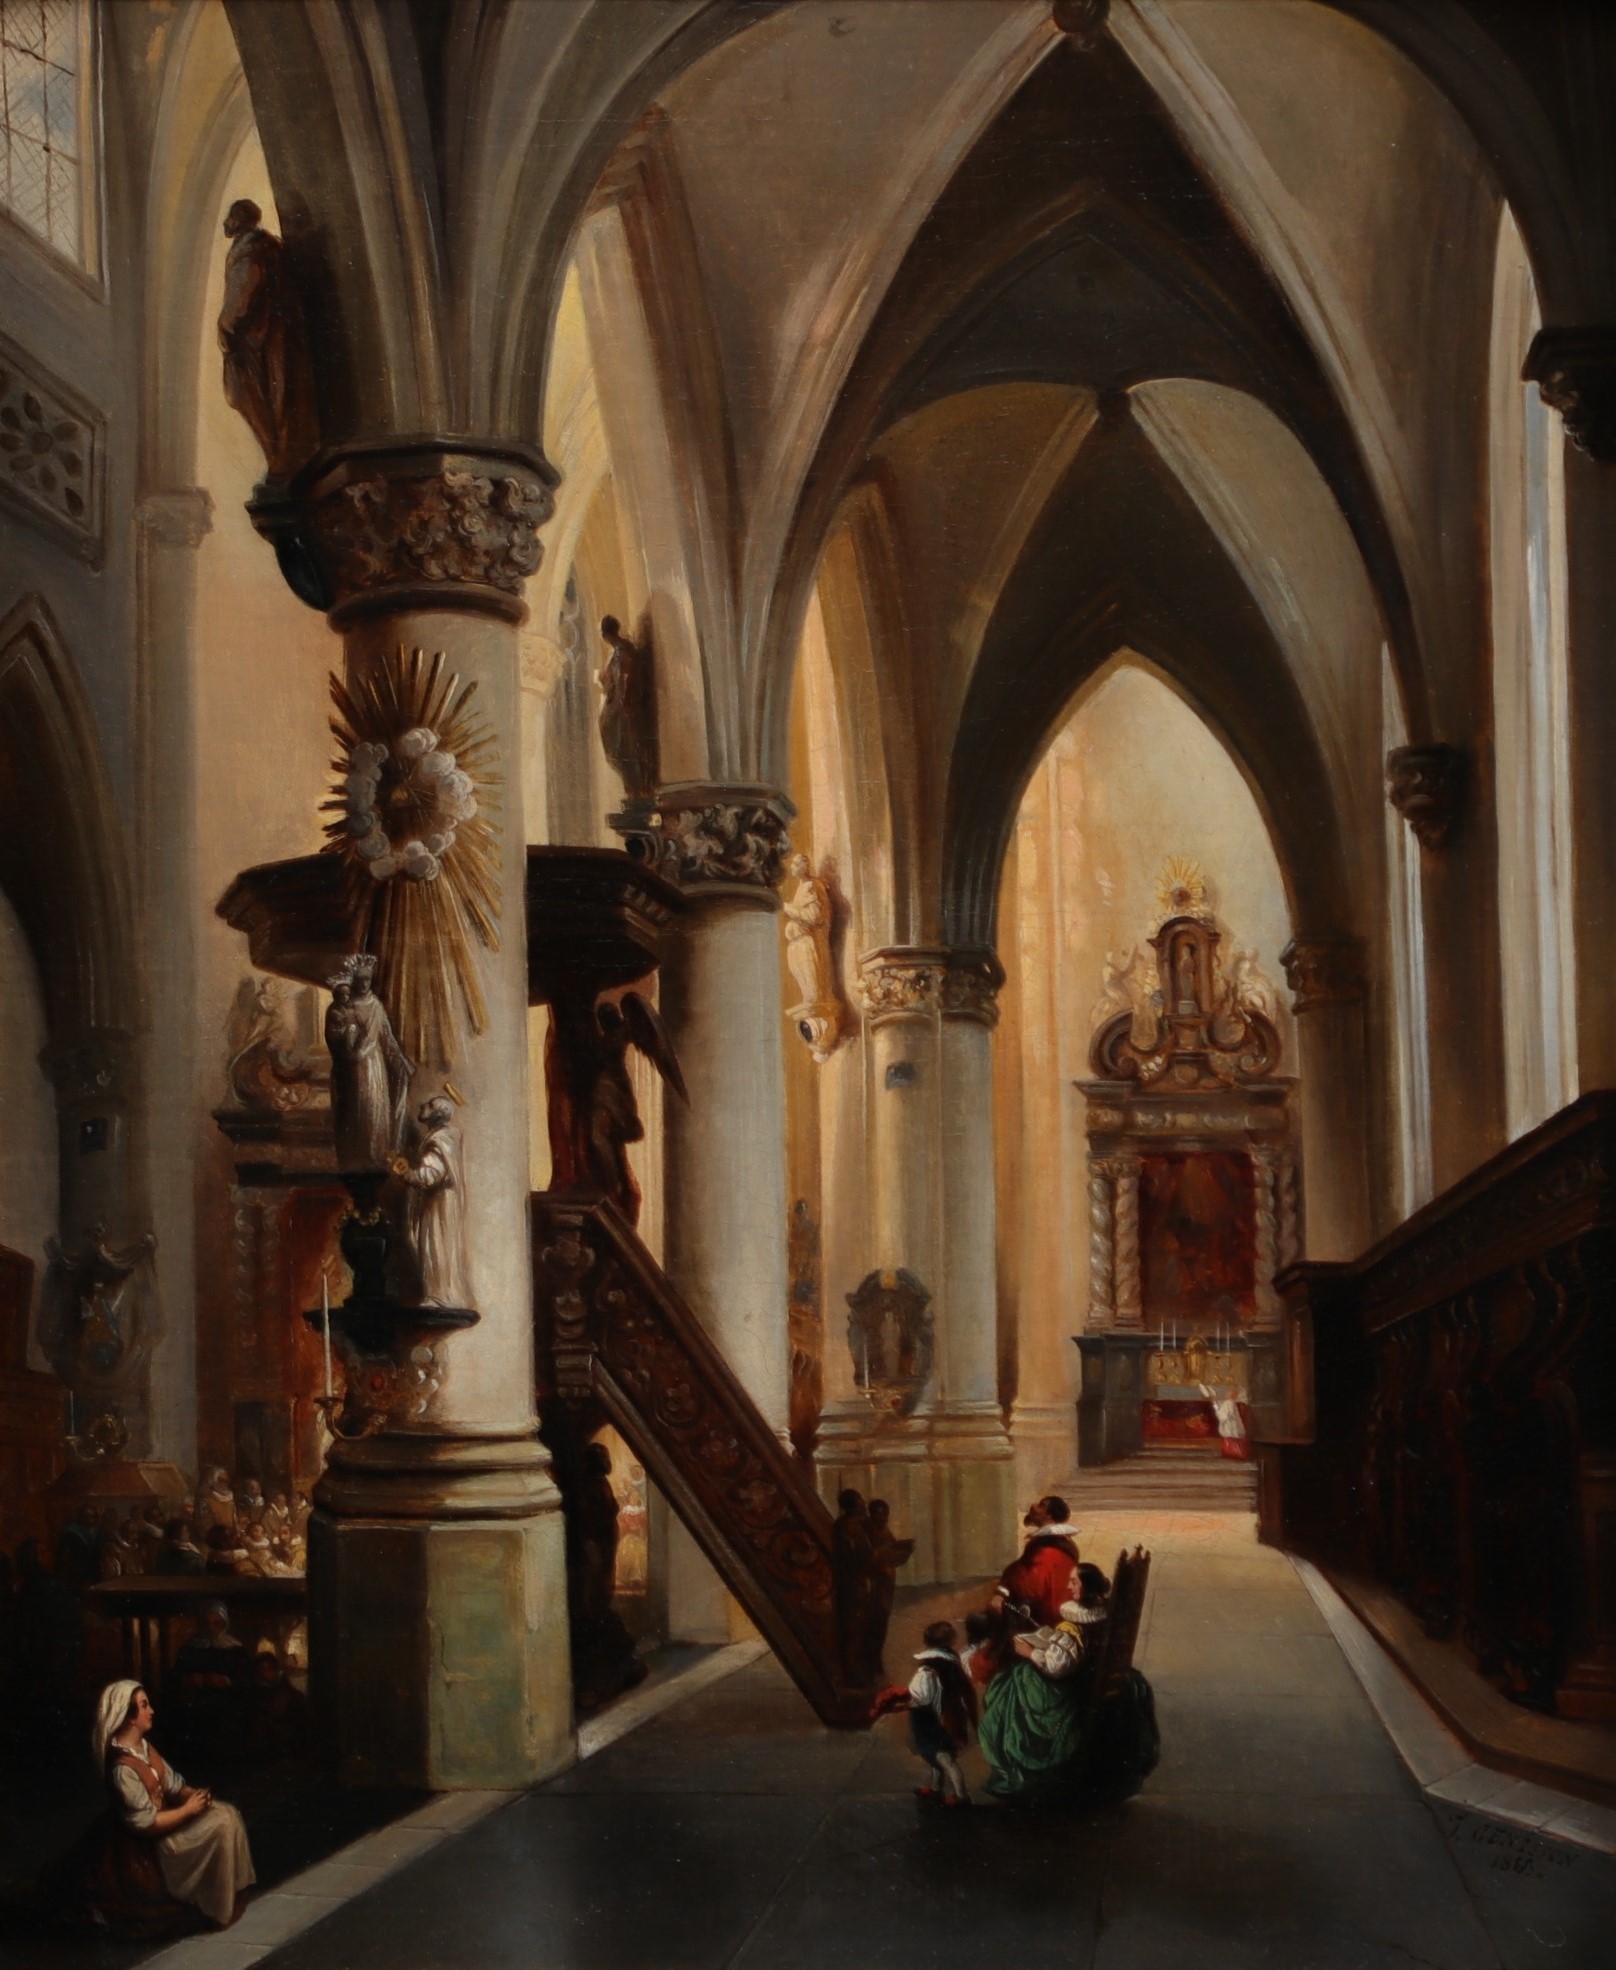 Jules Victor GENISSON (1805-1860) "Interior of a church" Oil on canvas.